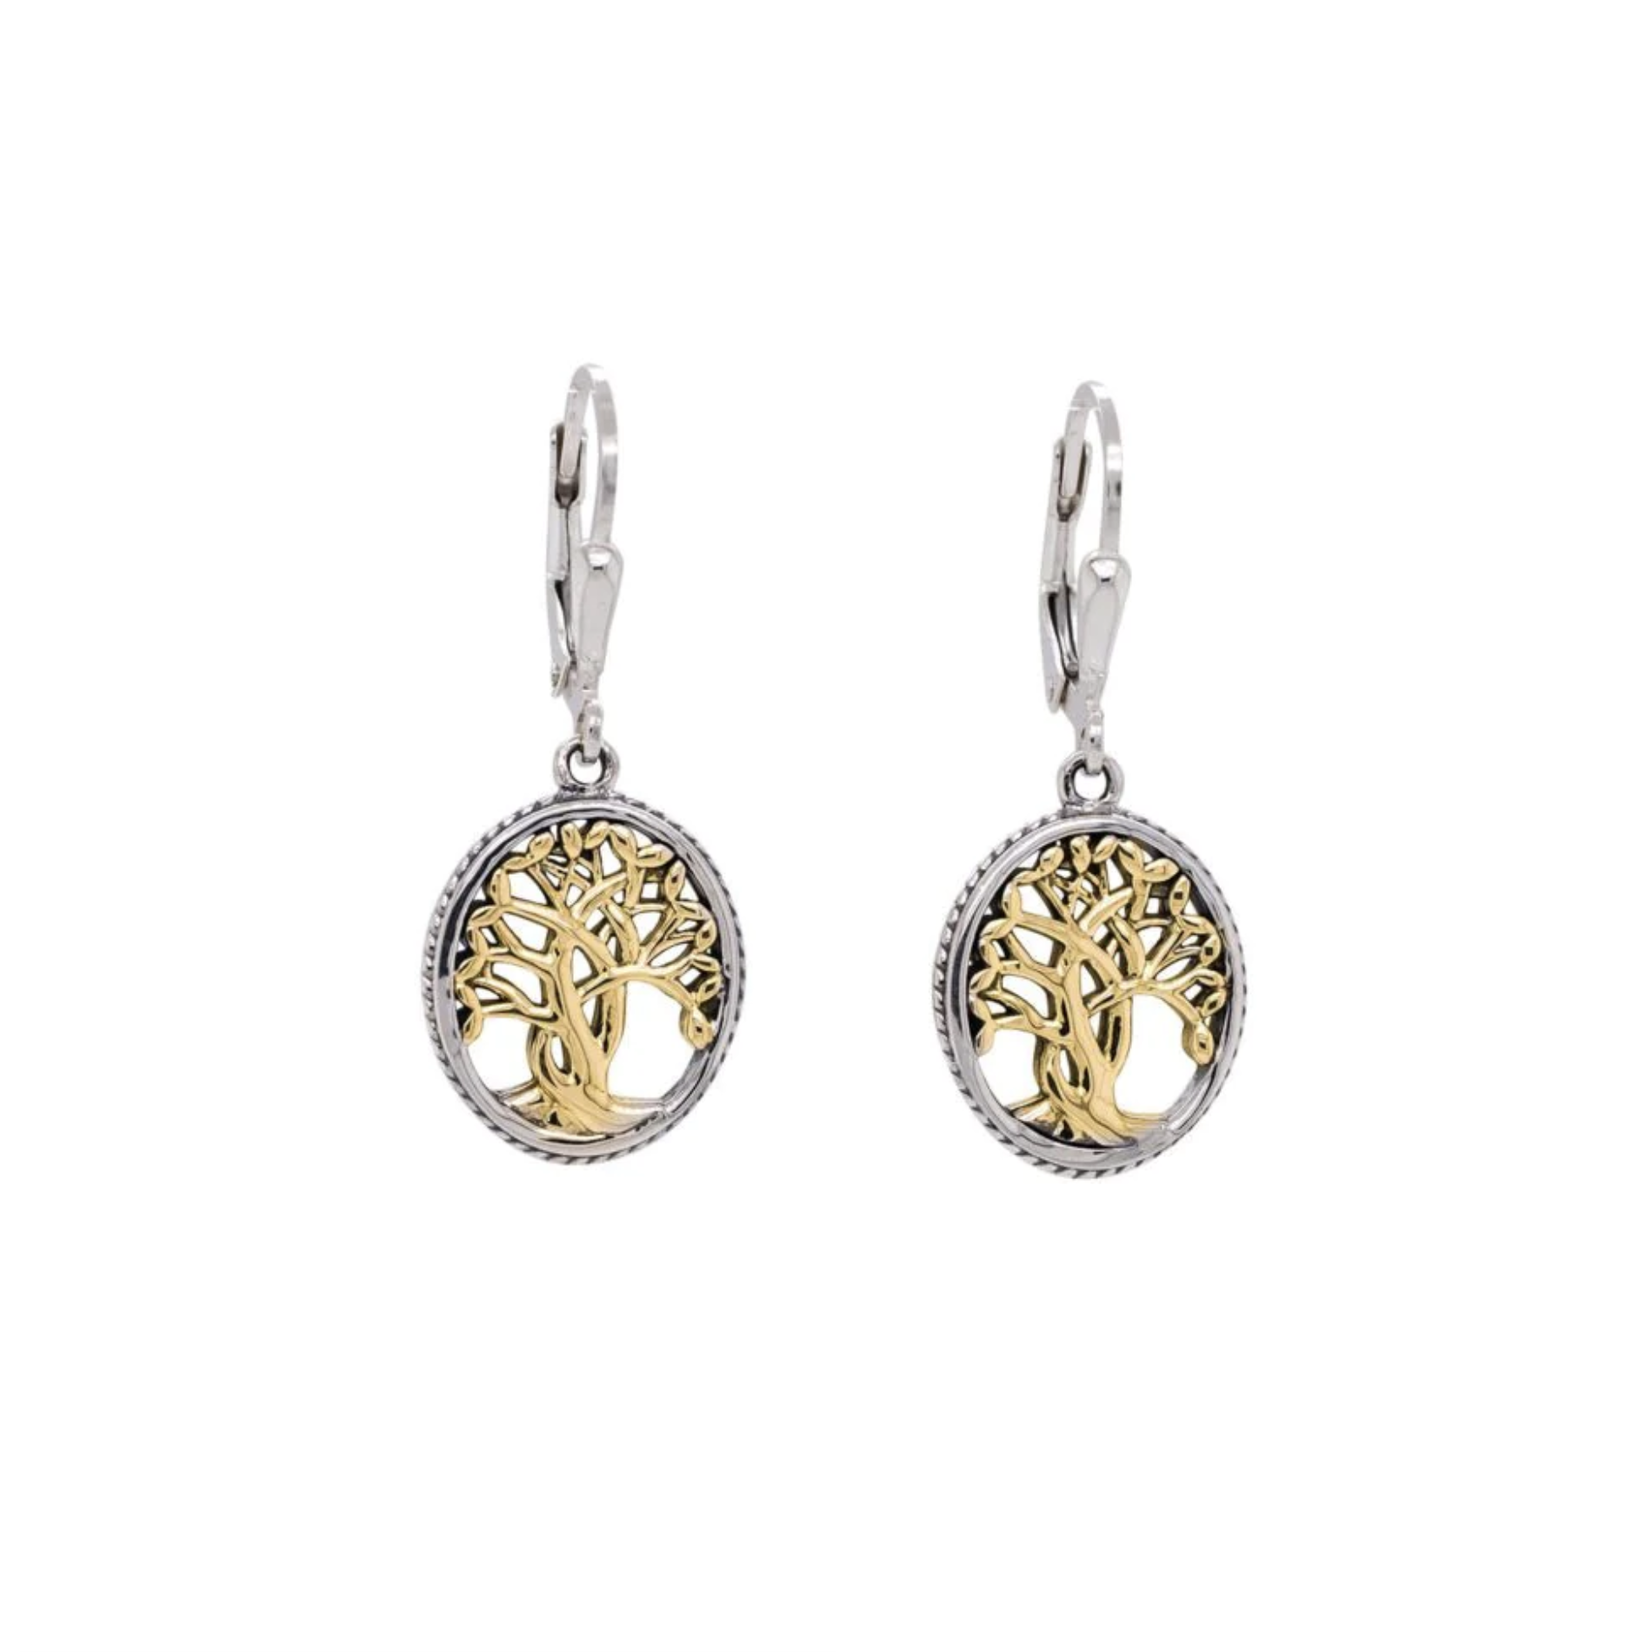 Keith Jack Silver and 10K Gold Small Tree of Life Earrings